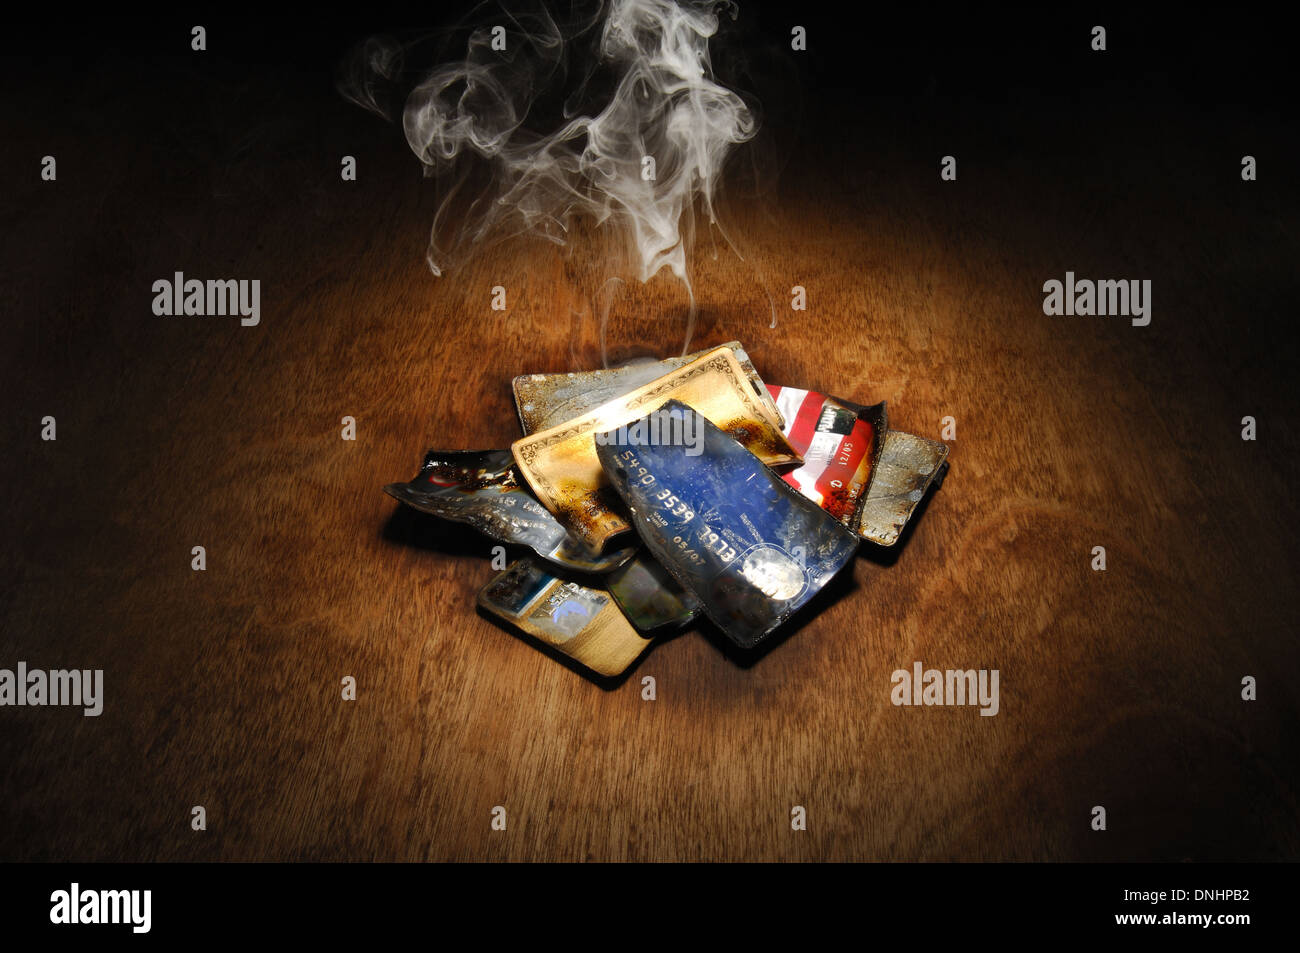 A pile of burnt credit cards with trails of smoke Stock Photo